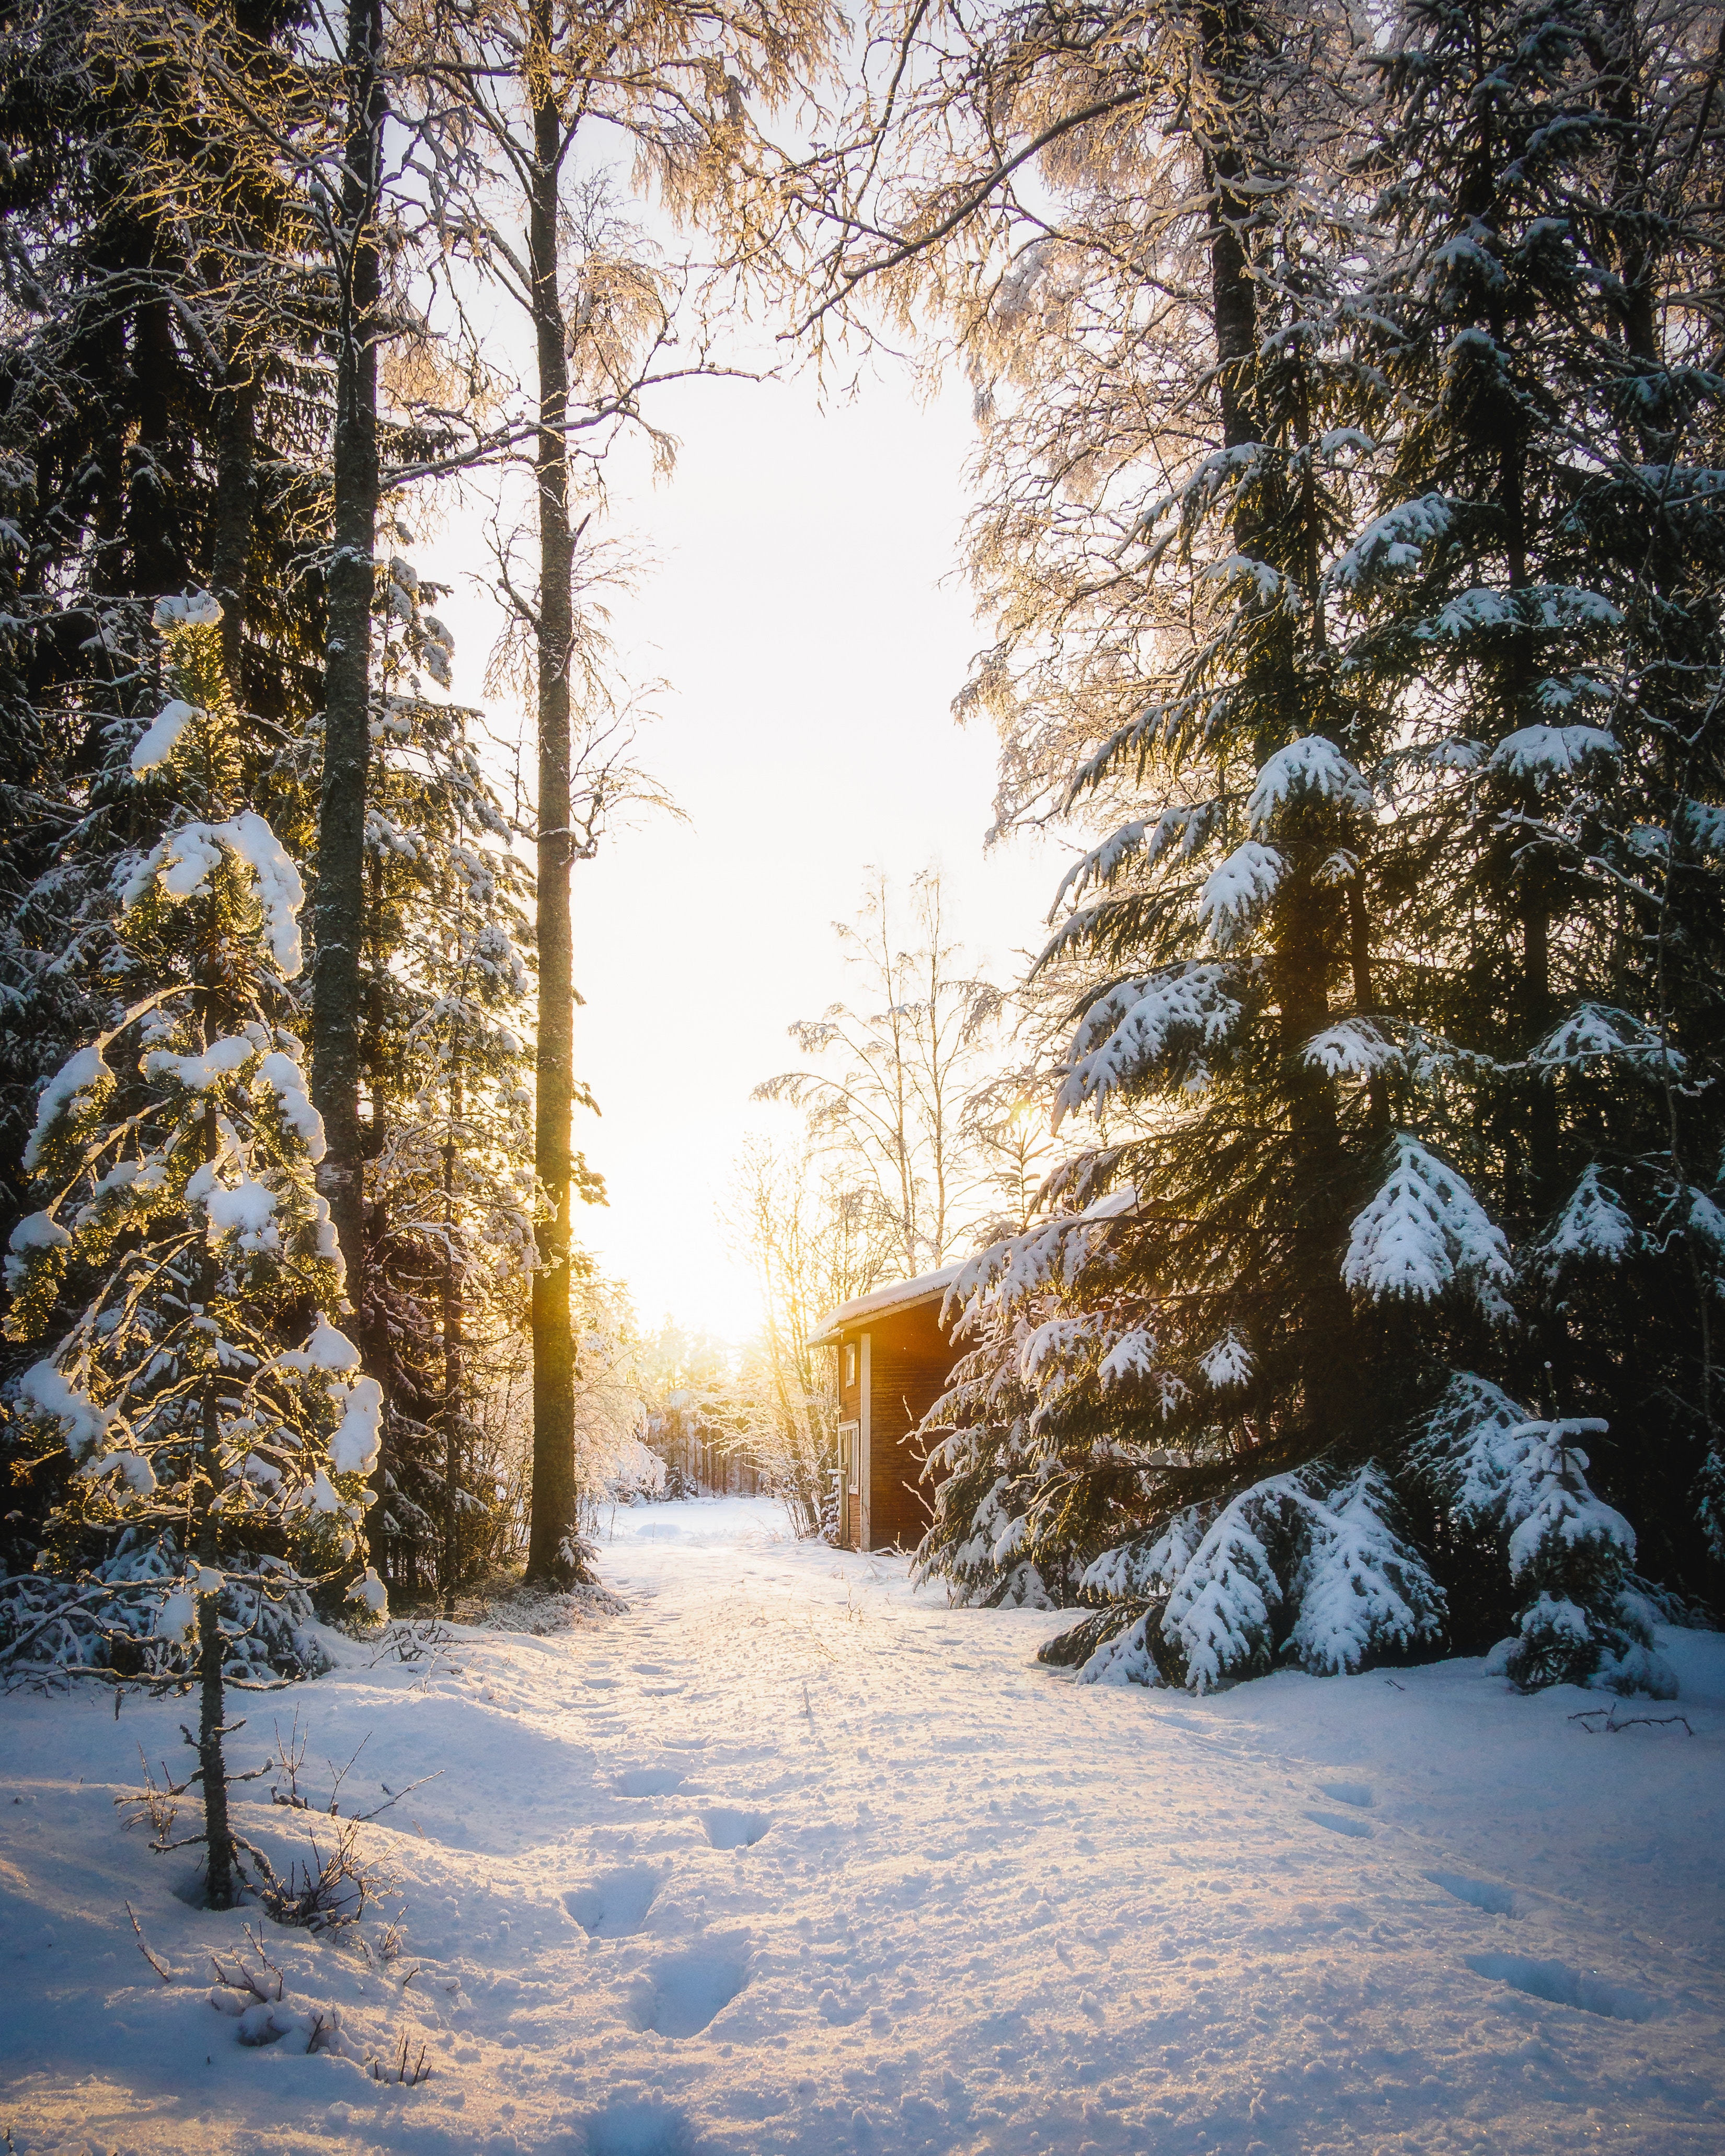 102446 download wallpaper winter, house, snow, nature, forest, sunlight screensavers and pictures for free